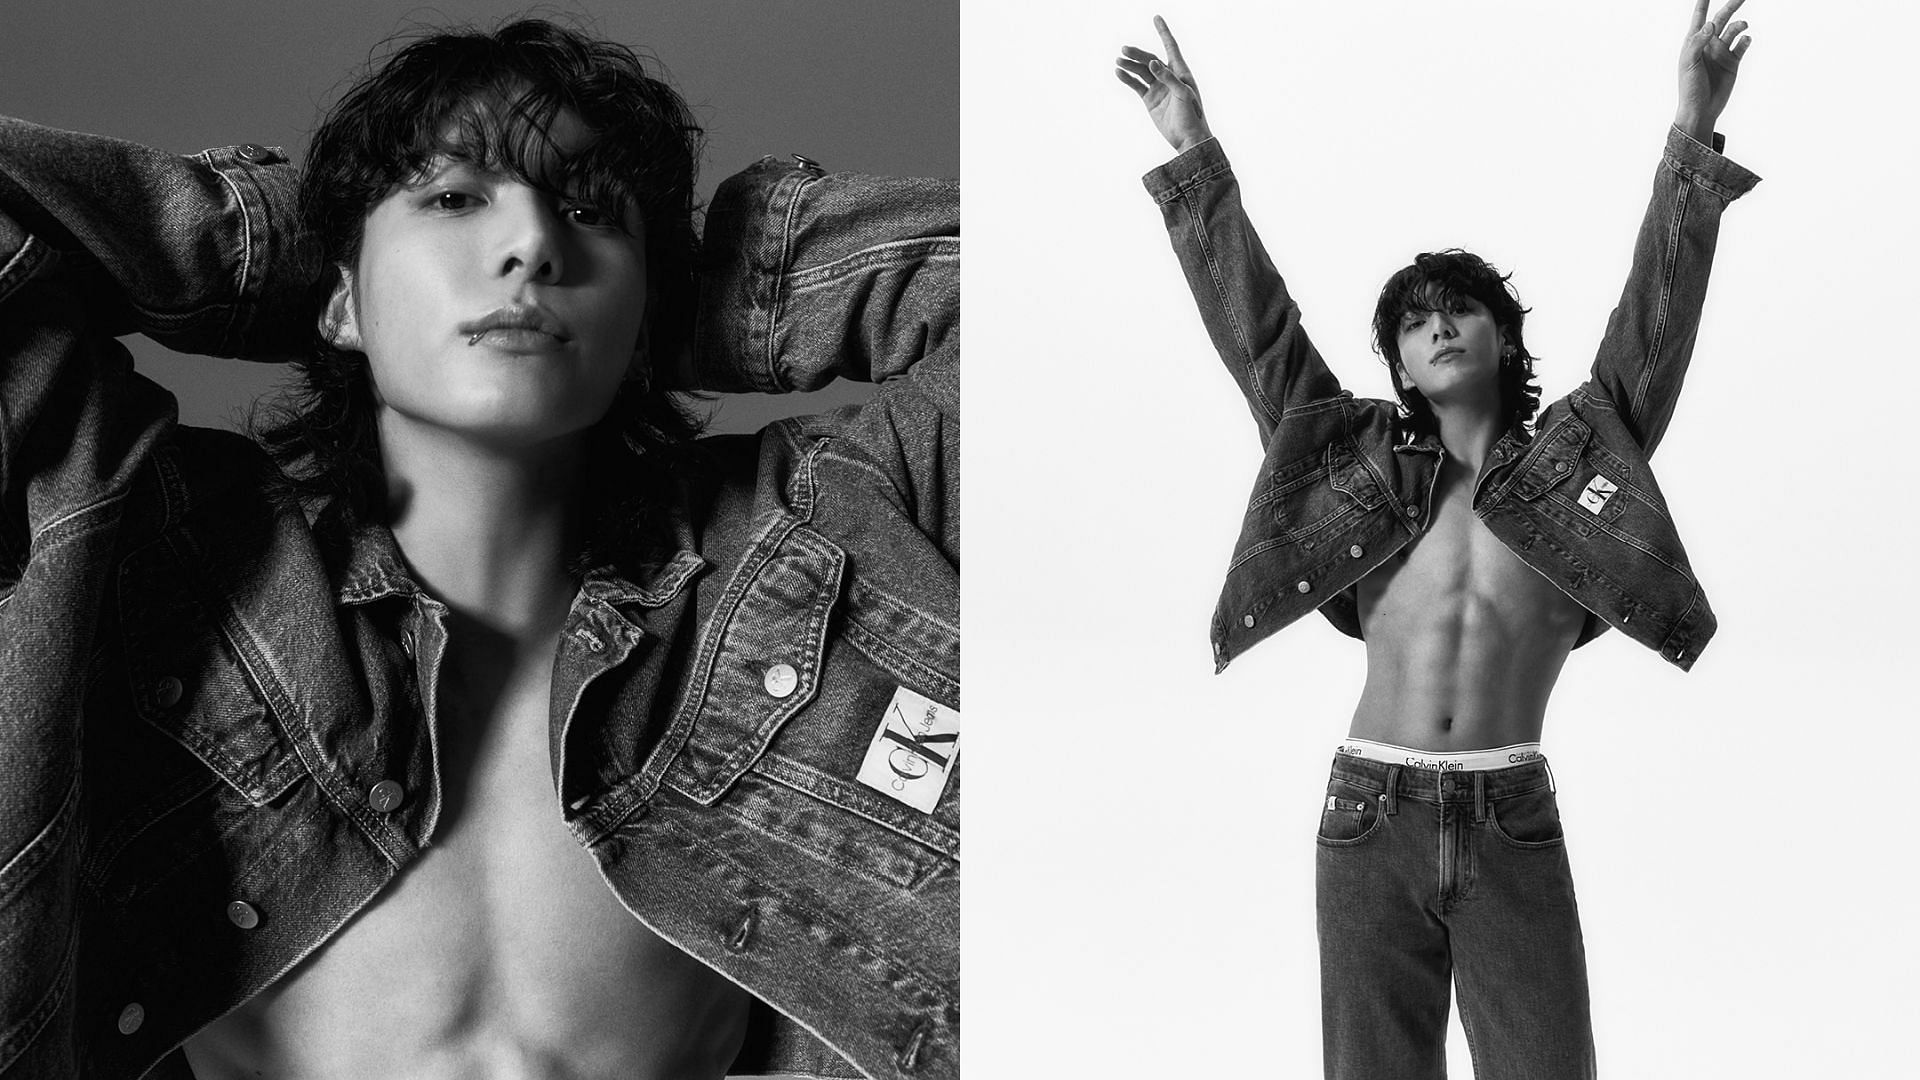 BTS' Jungkook takes center stage as Calvin Klein's new global ambassador -  ABC News